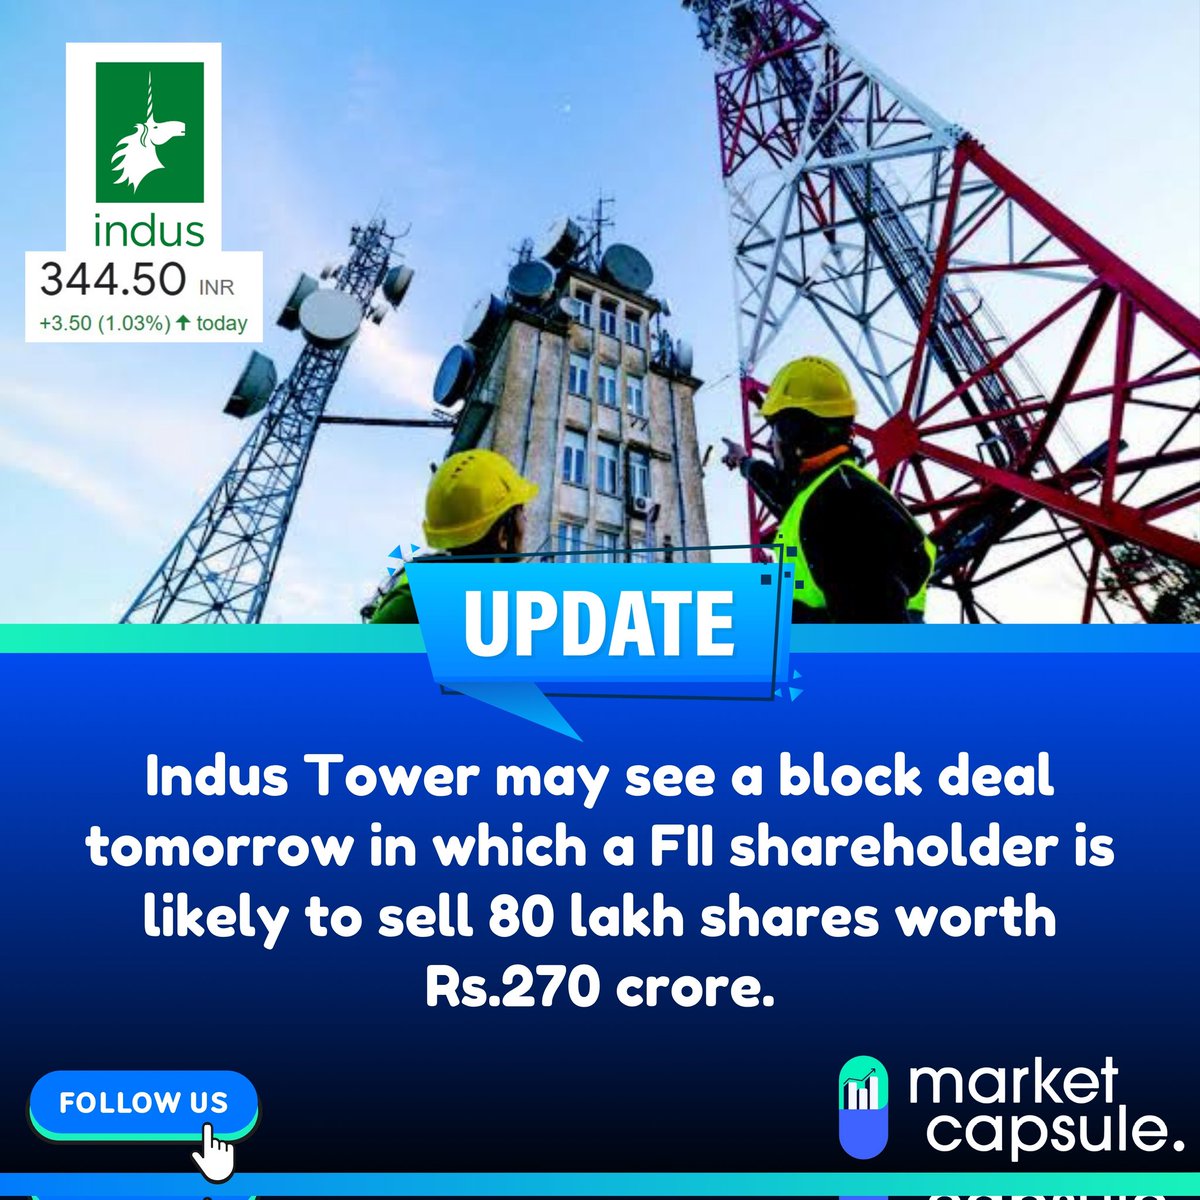 Follow us for more such Updates!
Our Instagram Page ⬇️
instagram.com/marketcapsule.…
#marketcapsule #industowers #blockdeal #indianstockmarket #MarketNews #MarketInsights